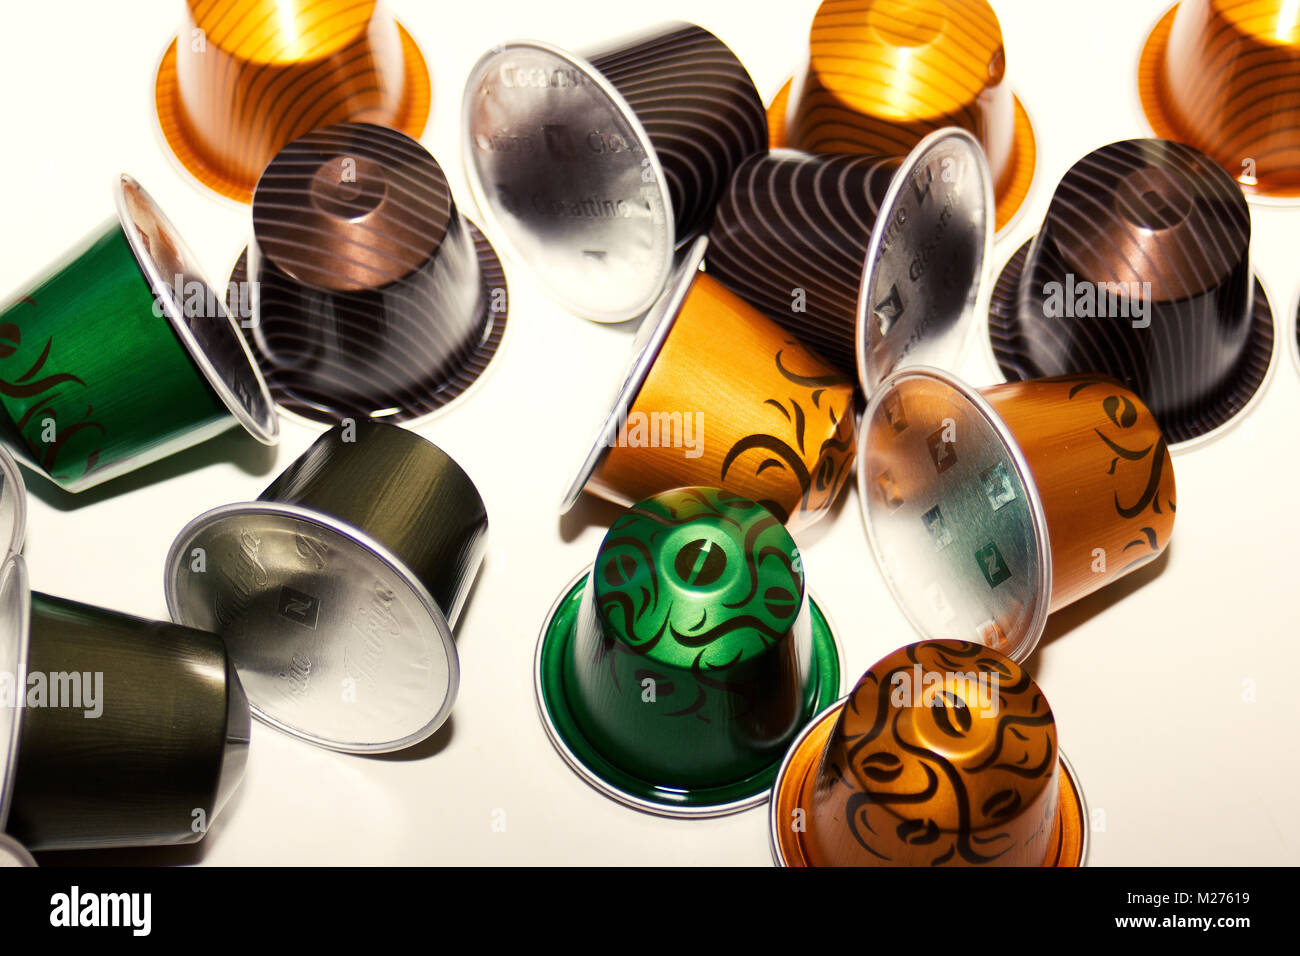 various new 'limited edition' colorful nespresso coffee pods/ capsules on white background Stock Photo